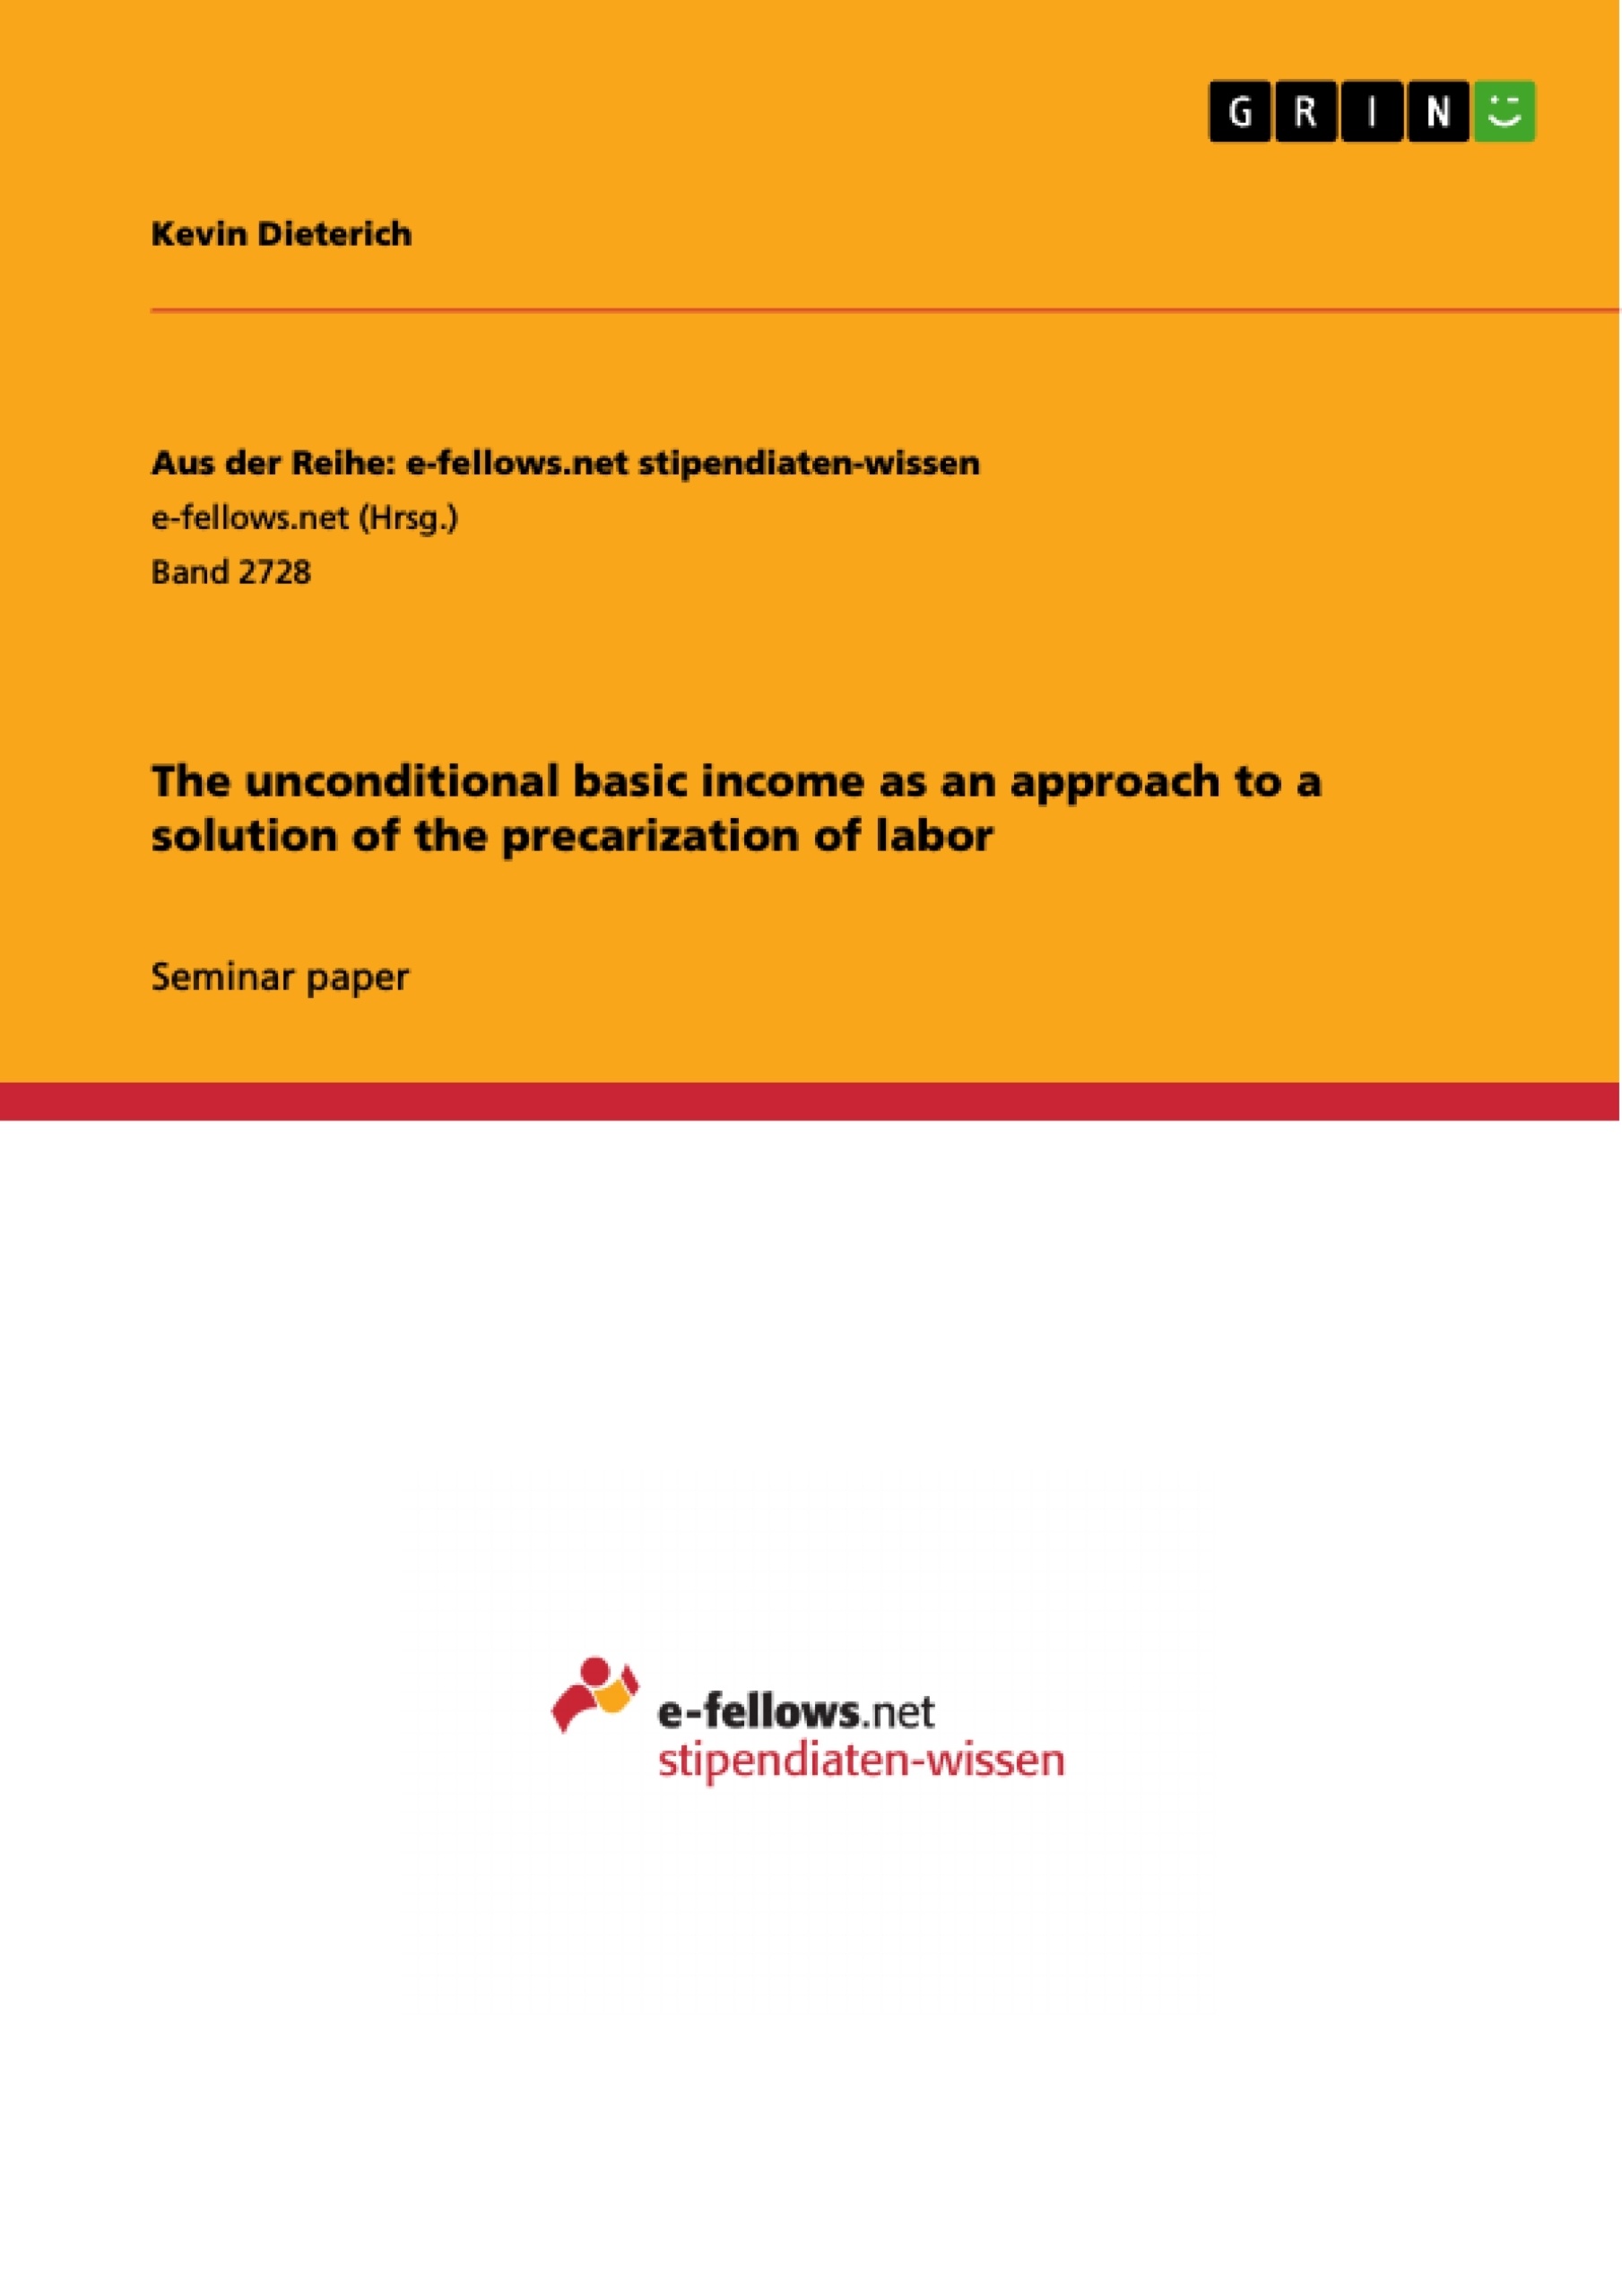 Titel: The unconditional basic income as an approach to a solution of the precarization of labor